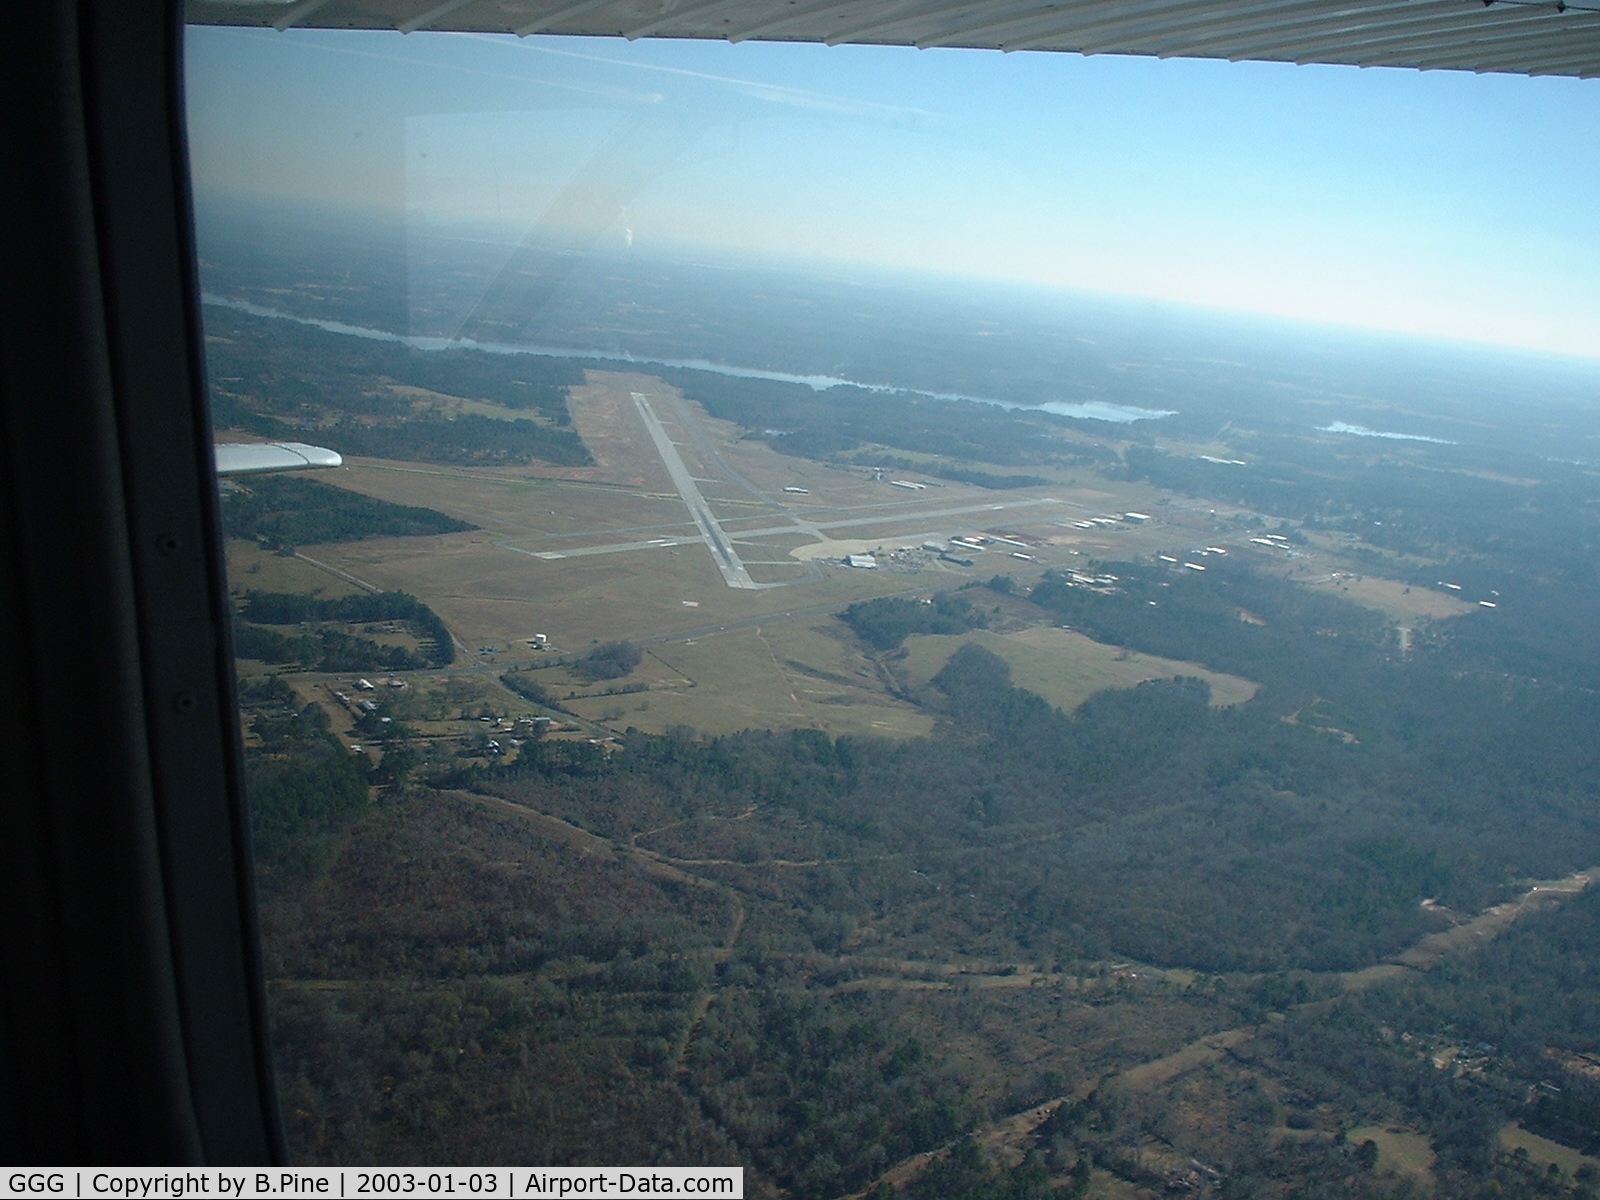 East Texas Regional Airport (GGG) - From the Air